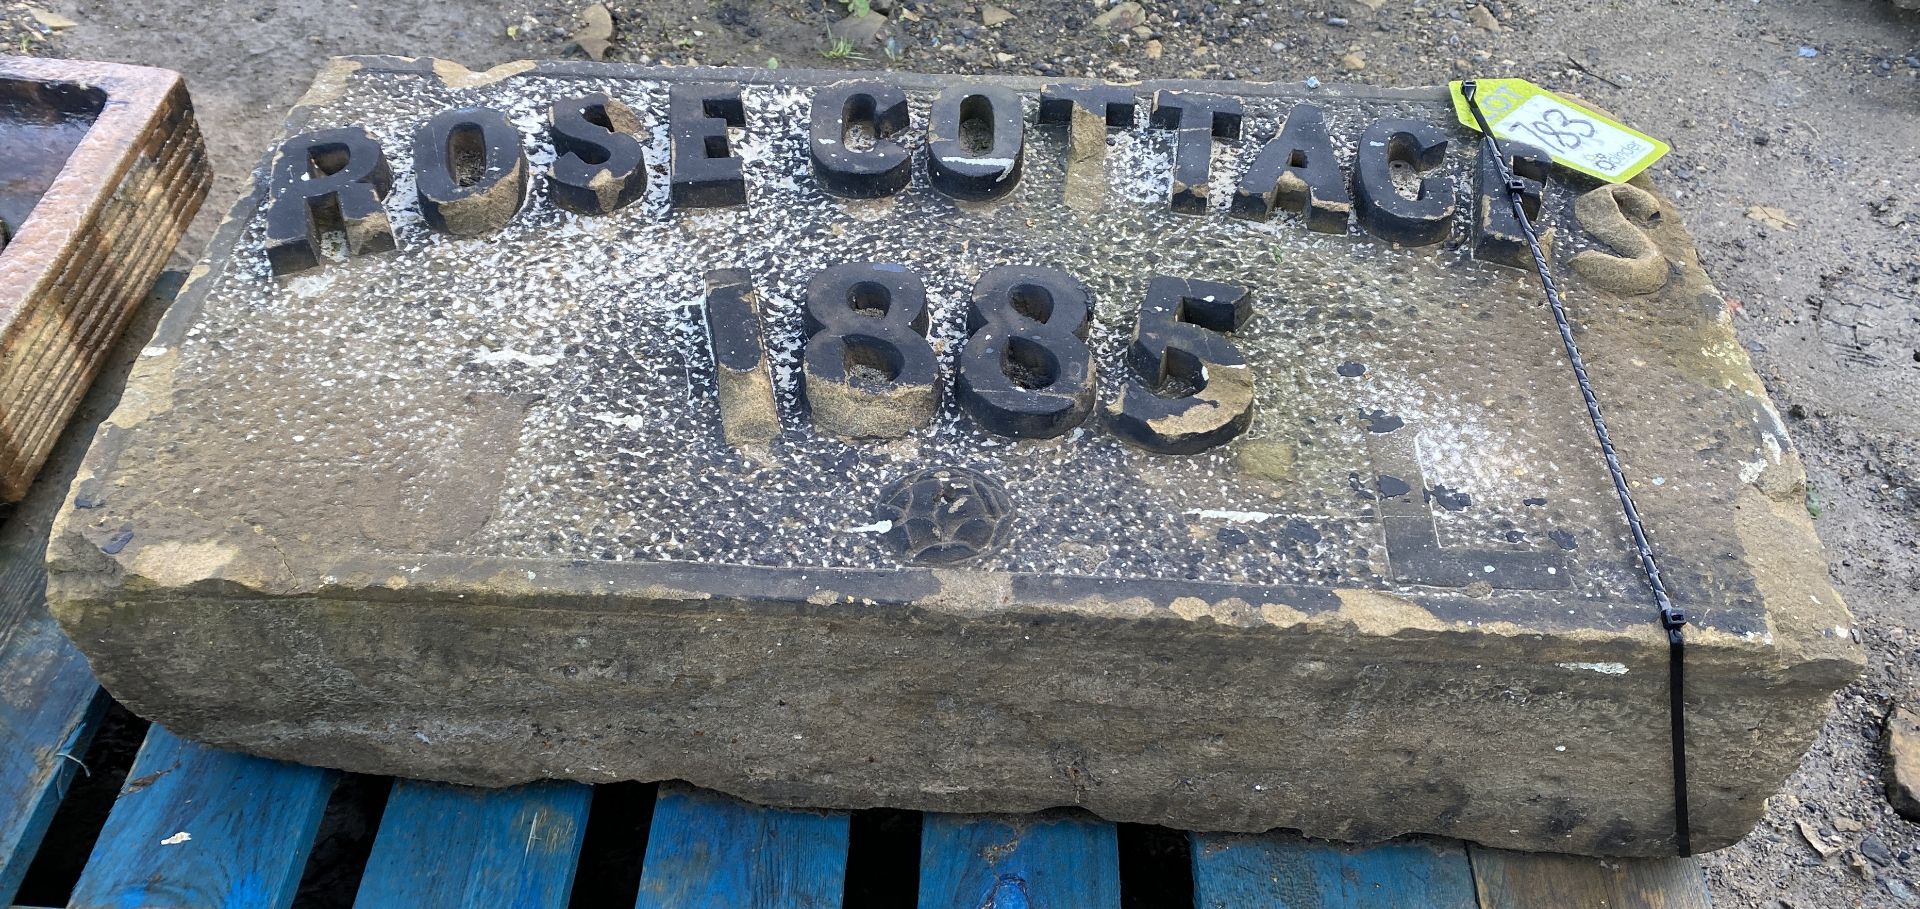 A Yorkshire stone Name Plaque with carved relief letters and numbers “Rose Cottages 1885”, approx. - Image 2 of 4